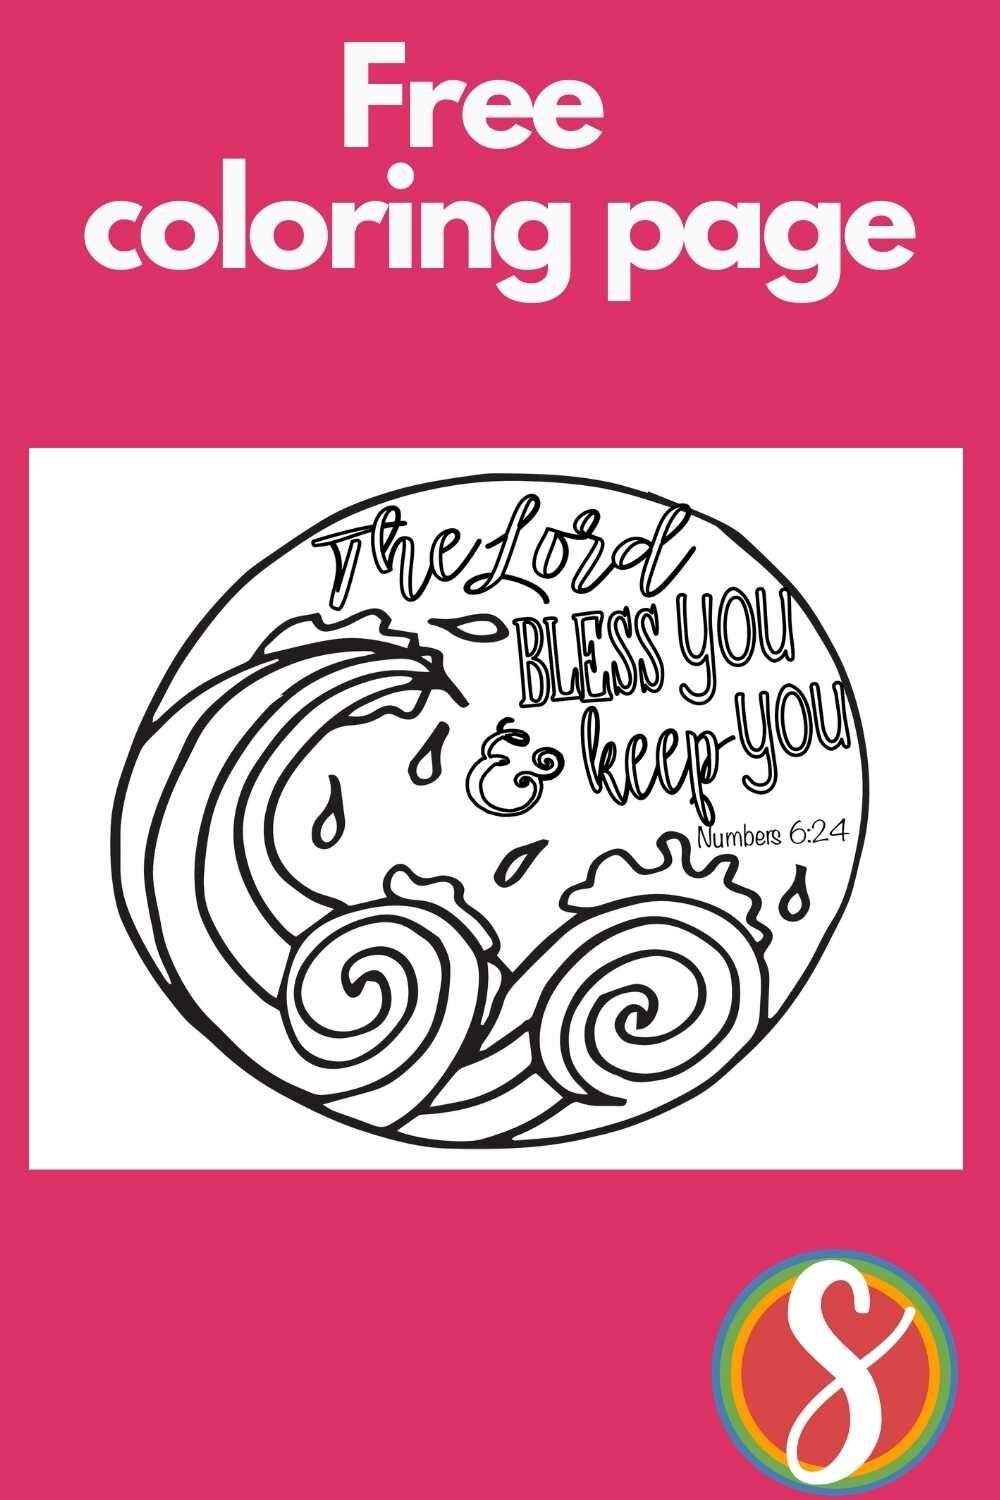 Lord bless you and keep you - this coloring sheet with a bit of scripture from Numbers is free to print and color from Stevie Doodles. Find more Christian coloring pages too - all free to print and color from Stevie Doodles